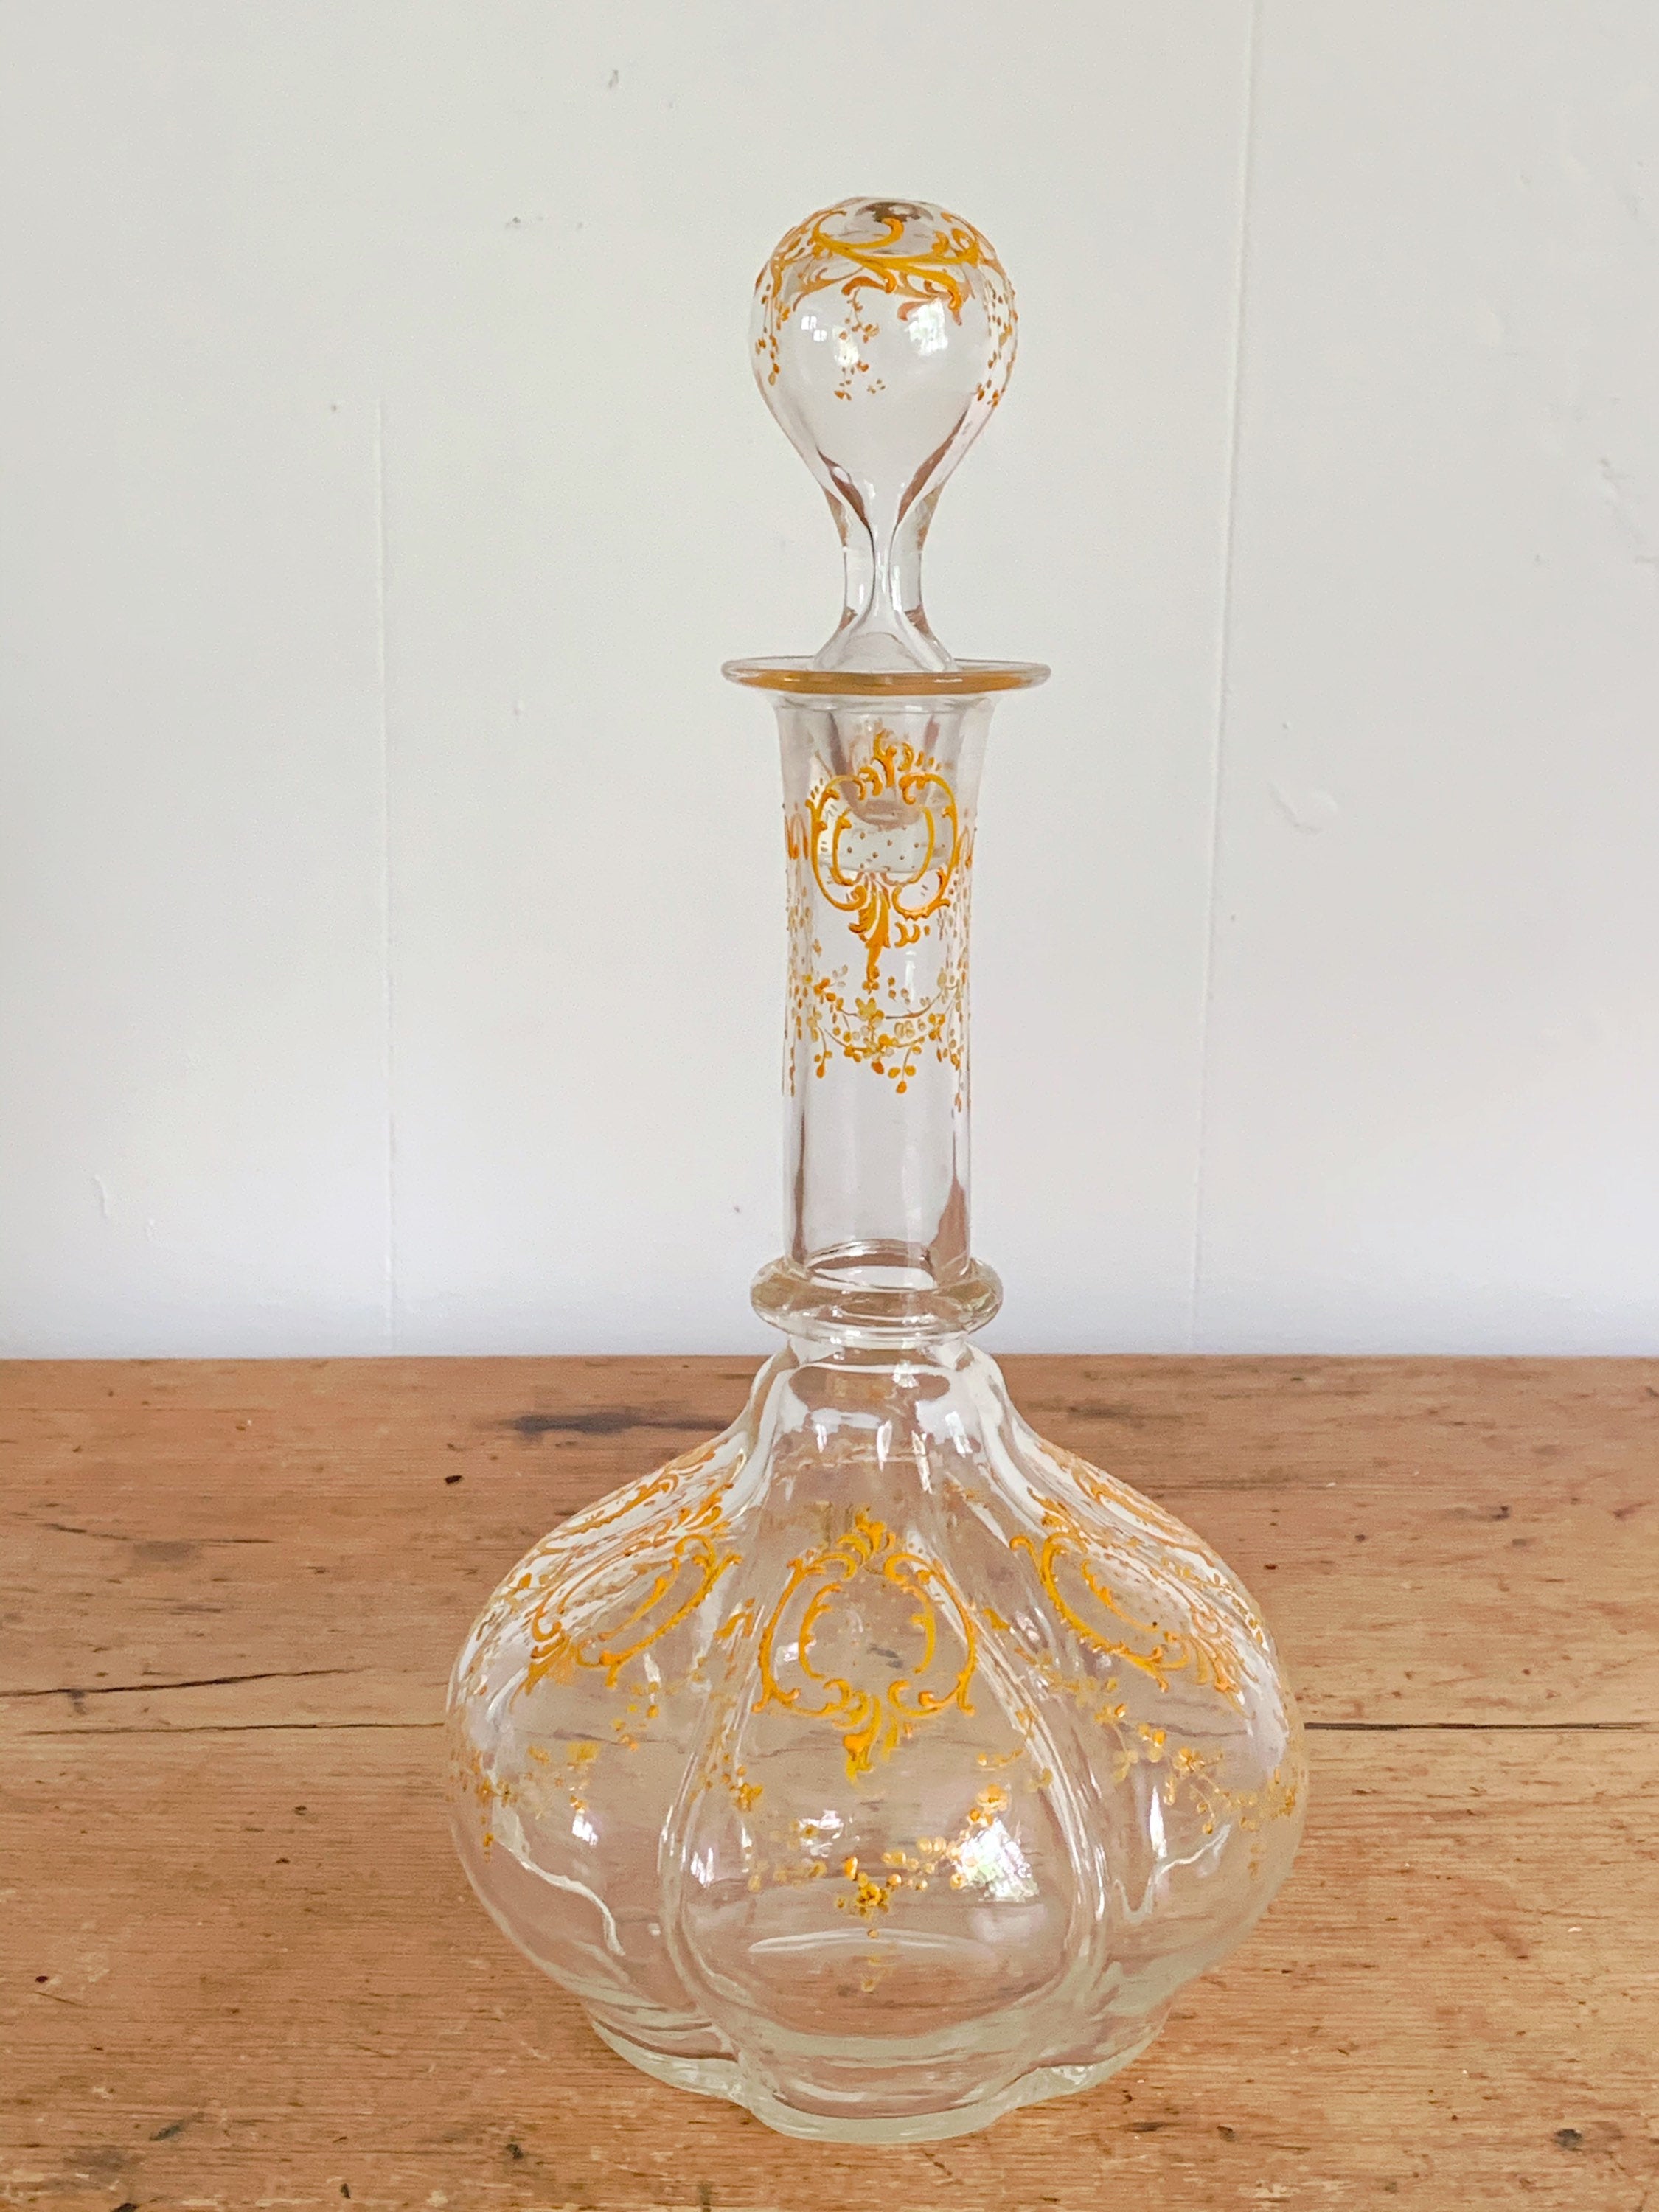 Antique 18th Century Hand Blown Glass Decanter with Gold Enamel Paint and Blown Glass Stopper | Liquor Decanter Barware Gift for Her